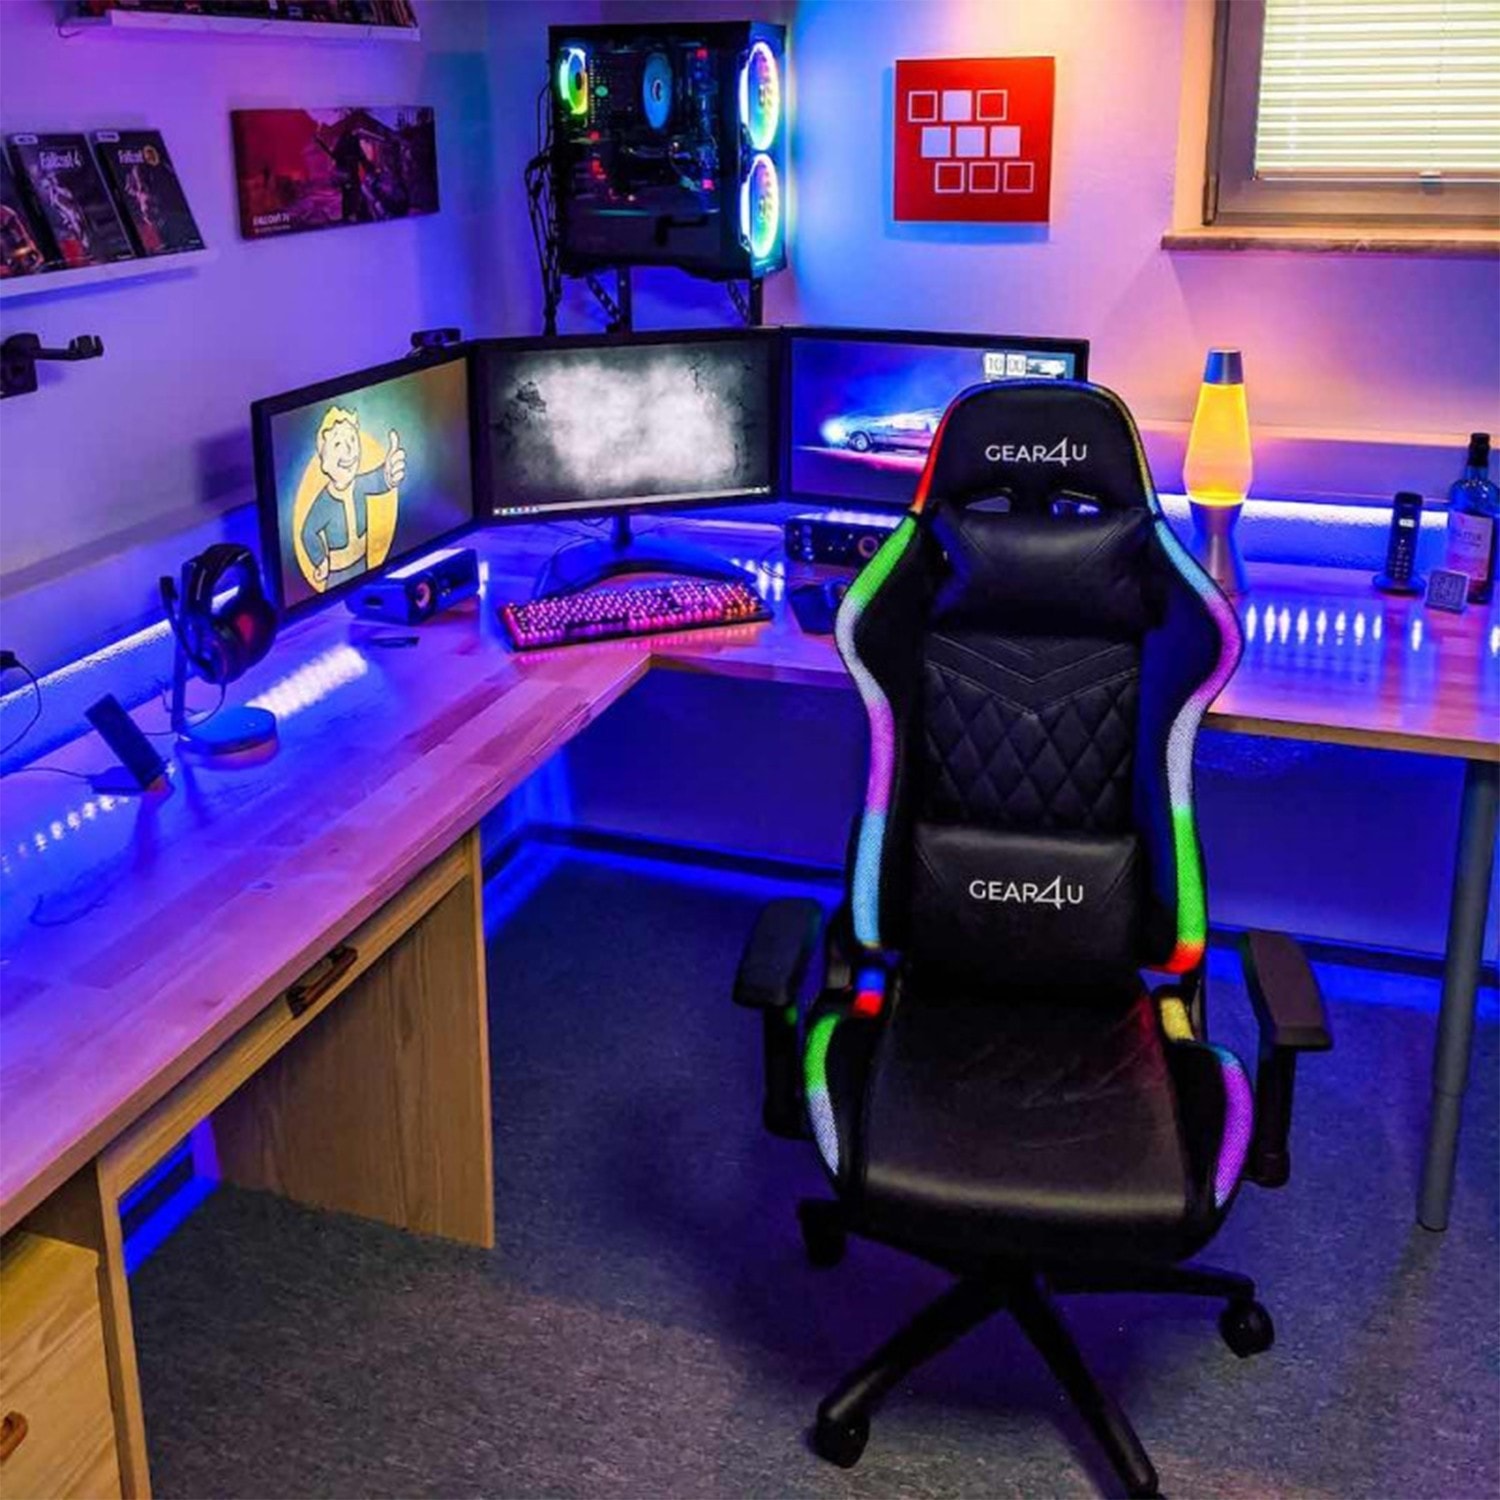 Fourze ✓ Chaise Gaming RGB / Siège gamer LED pas cher !